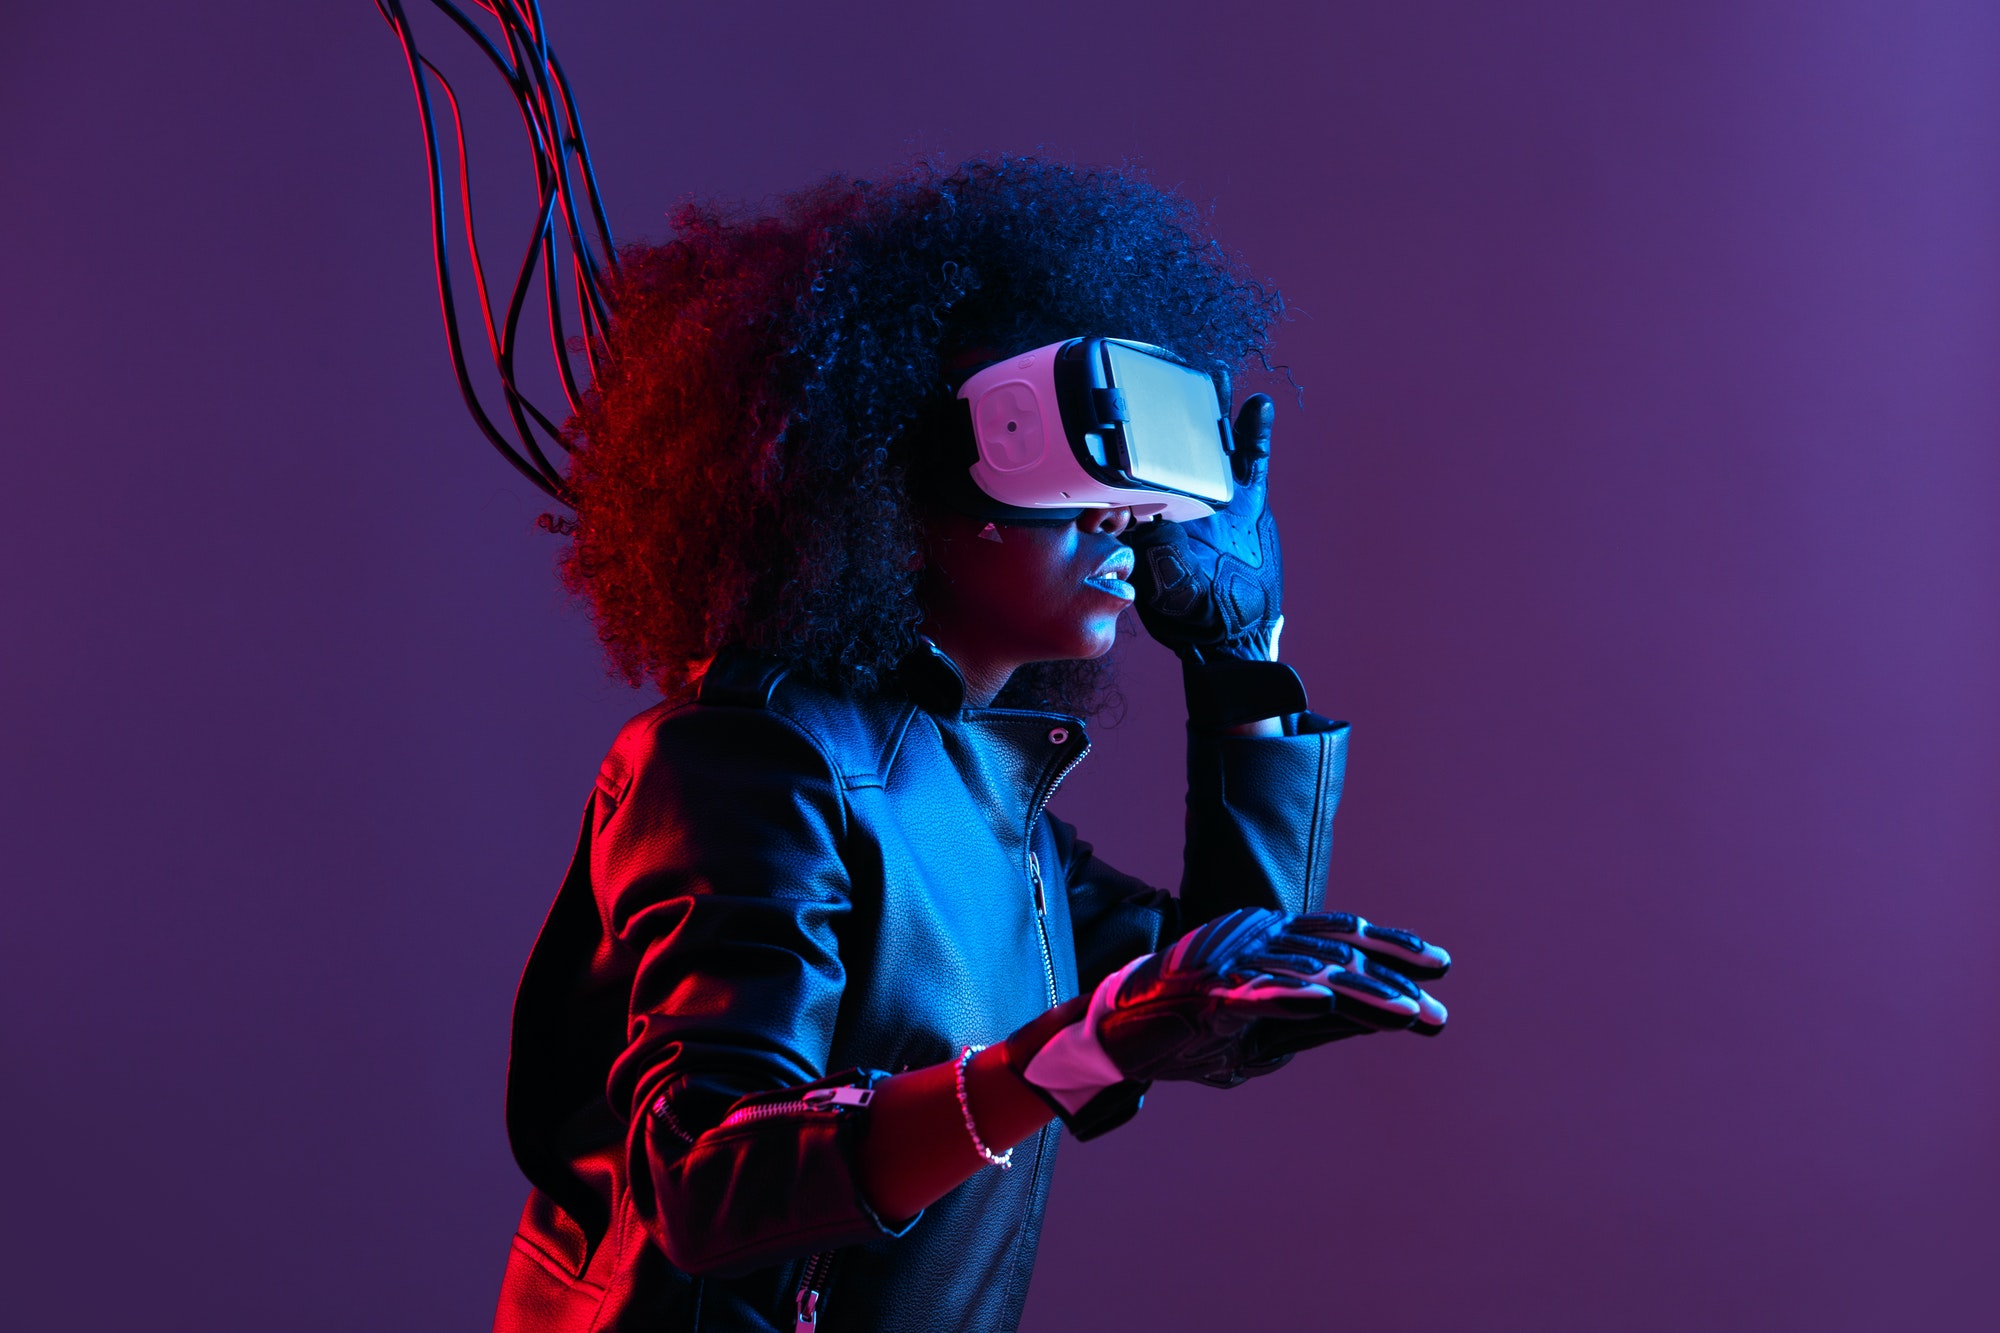 Mod curly dark haired girl dressed in black leather jacket and gloves uses the virtual reality